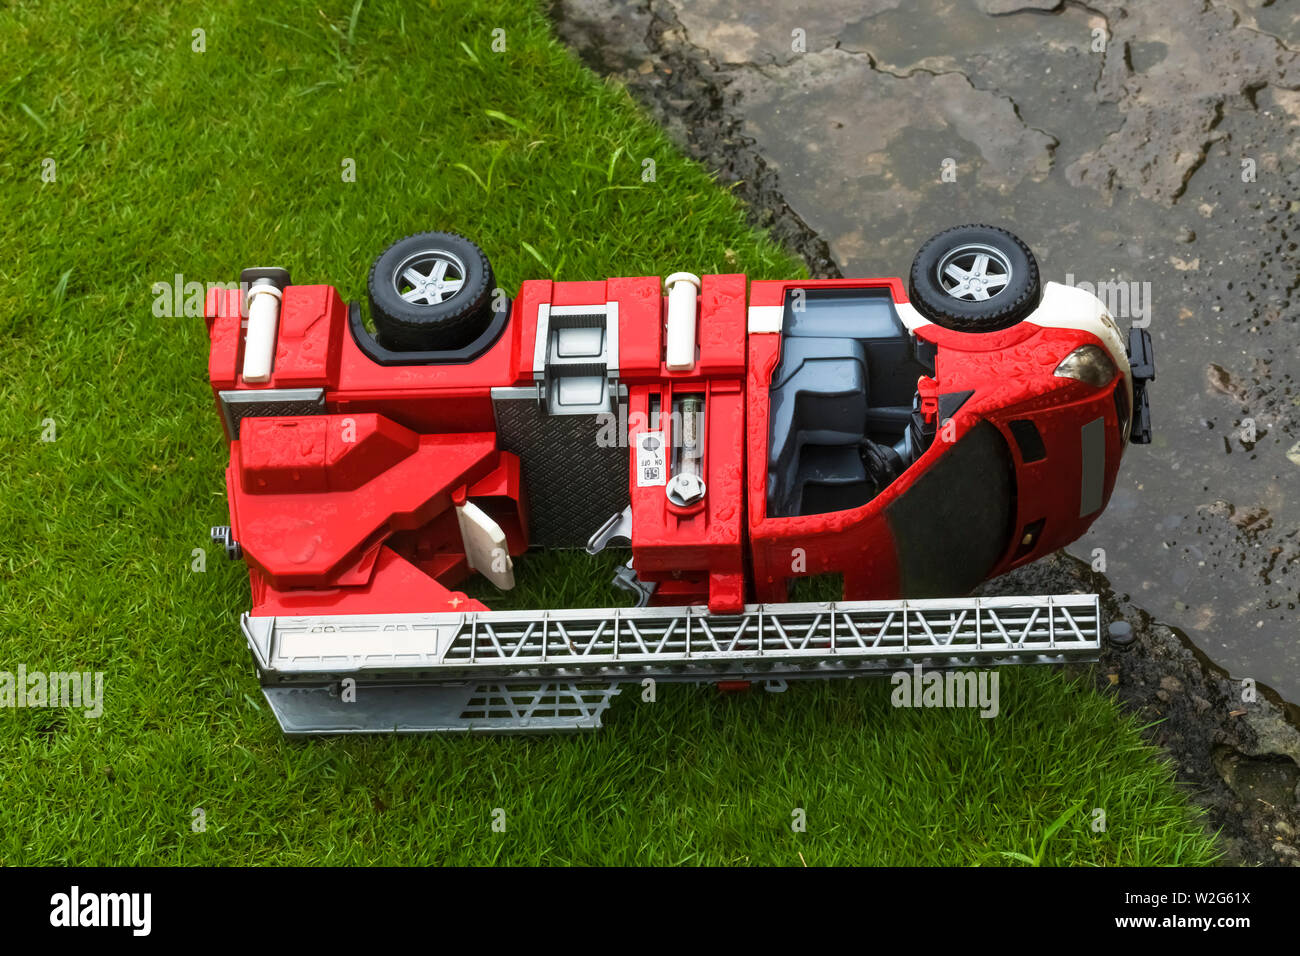 Toy fire engine abandoned on the grass lone in the rain. Stock Photo